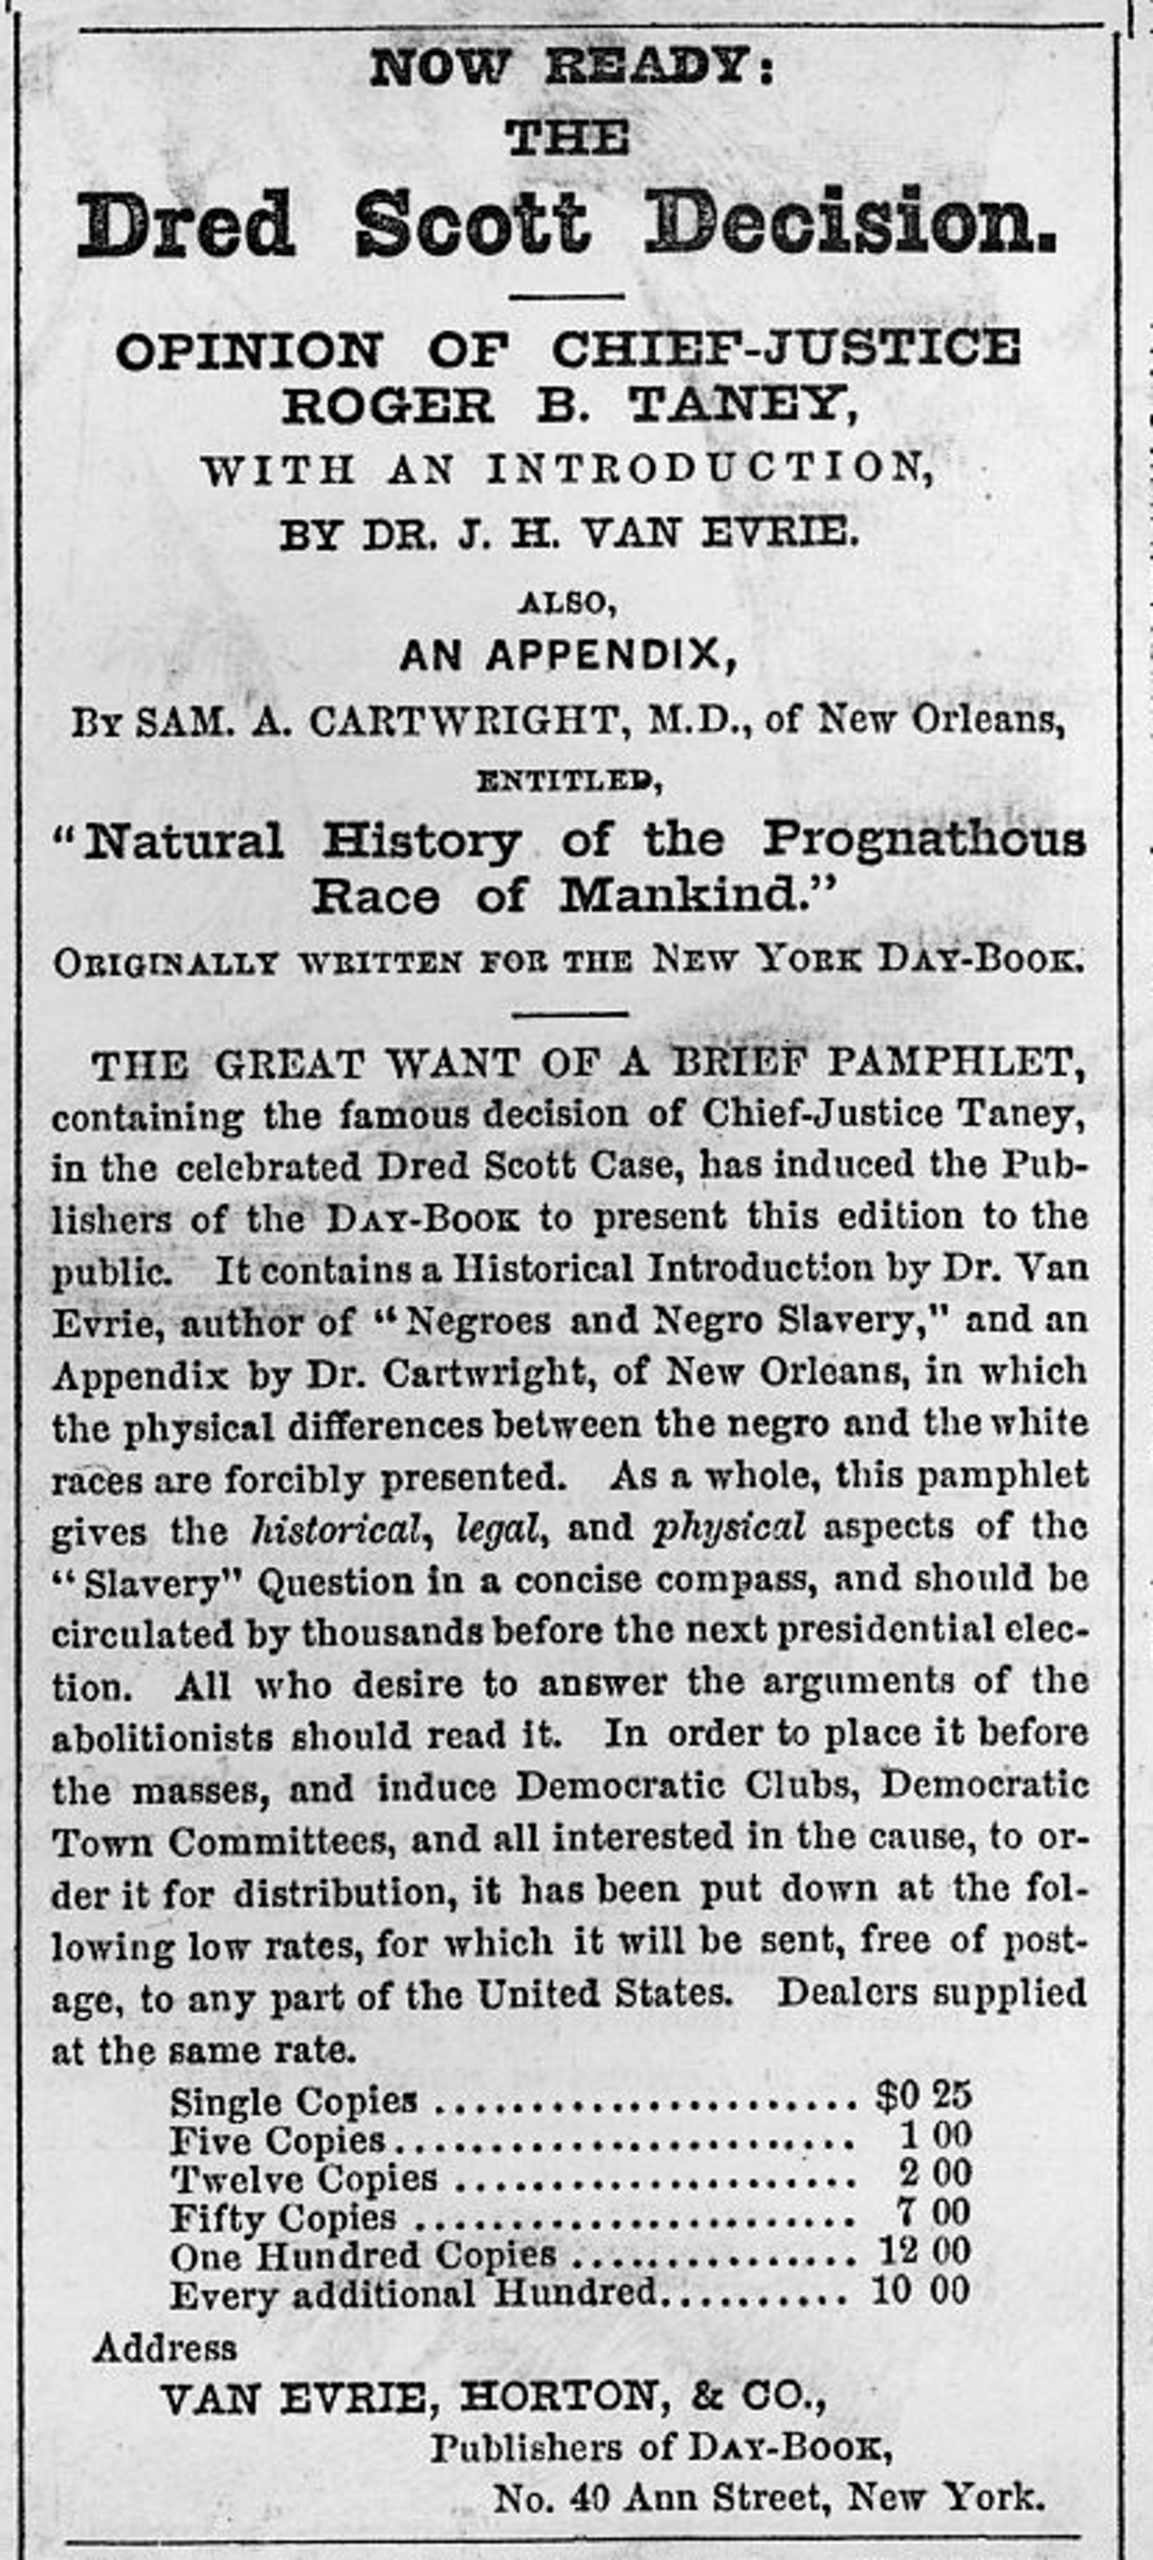 Advertisement for a pro-slavery pamphlet following the Dred Scott Decision